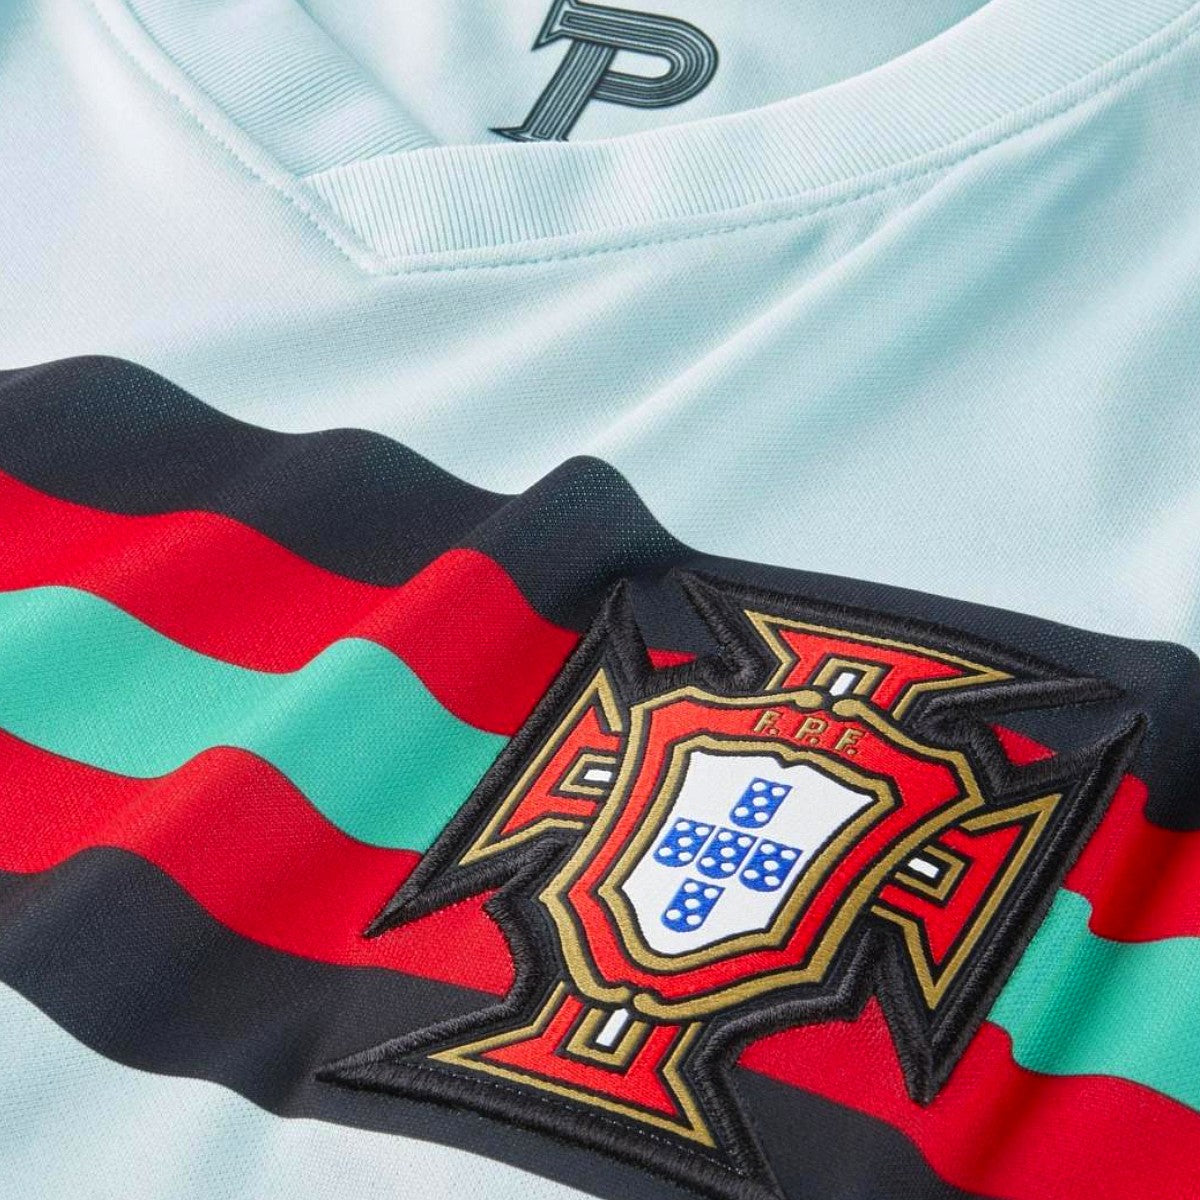 Portugal national team Away soccer jersey 2021/22 - Nike –